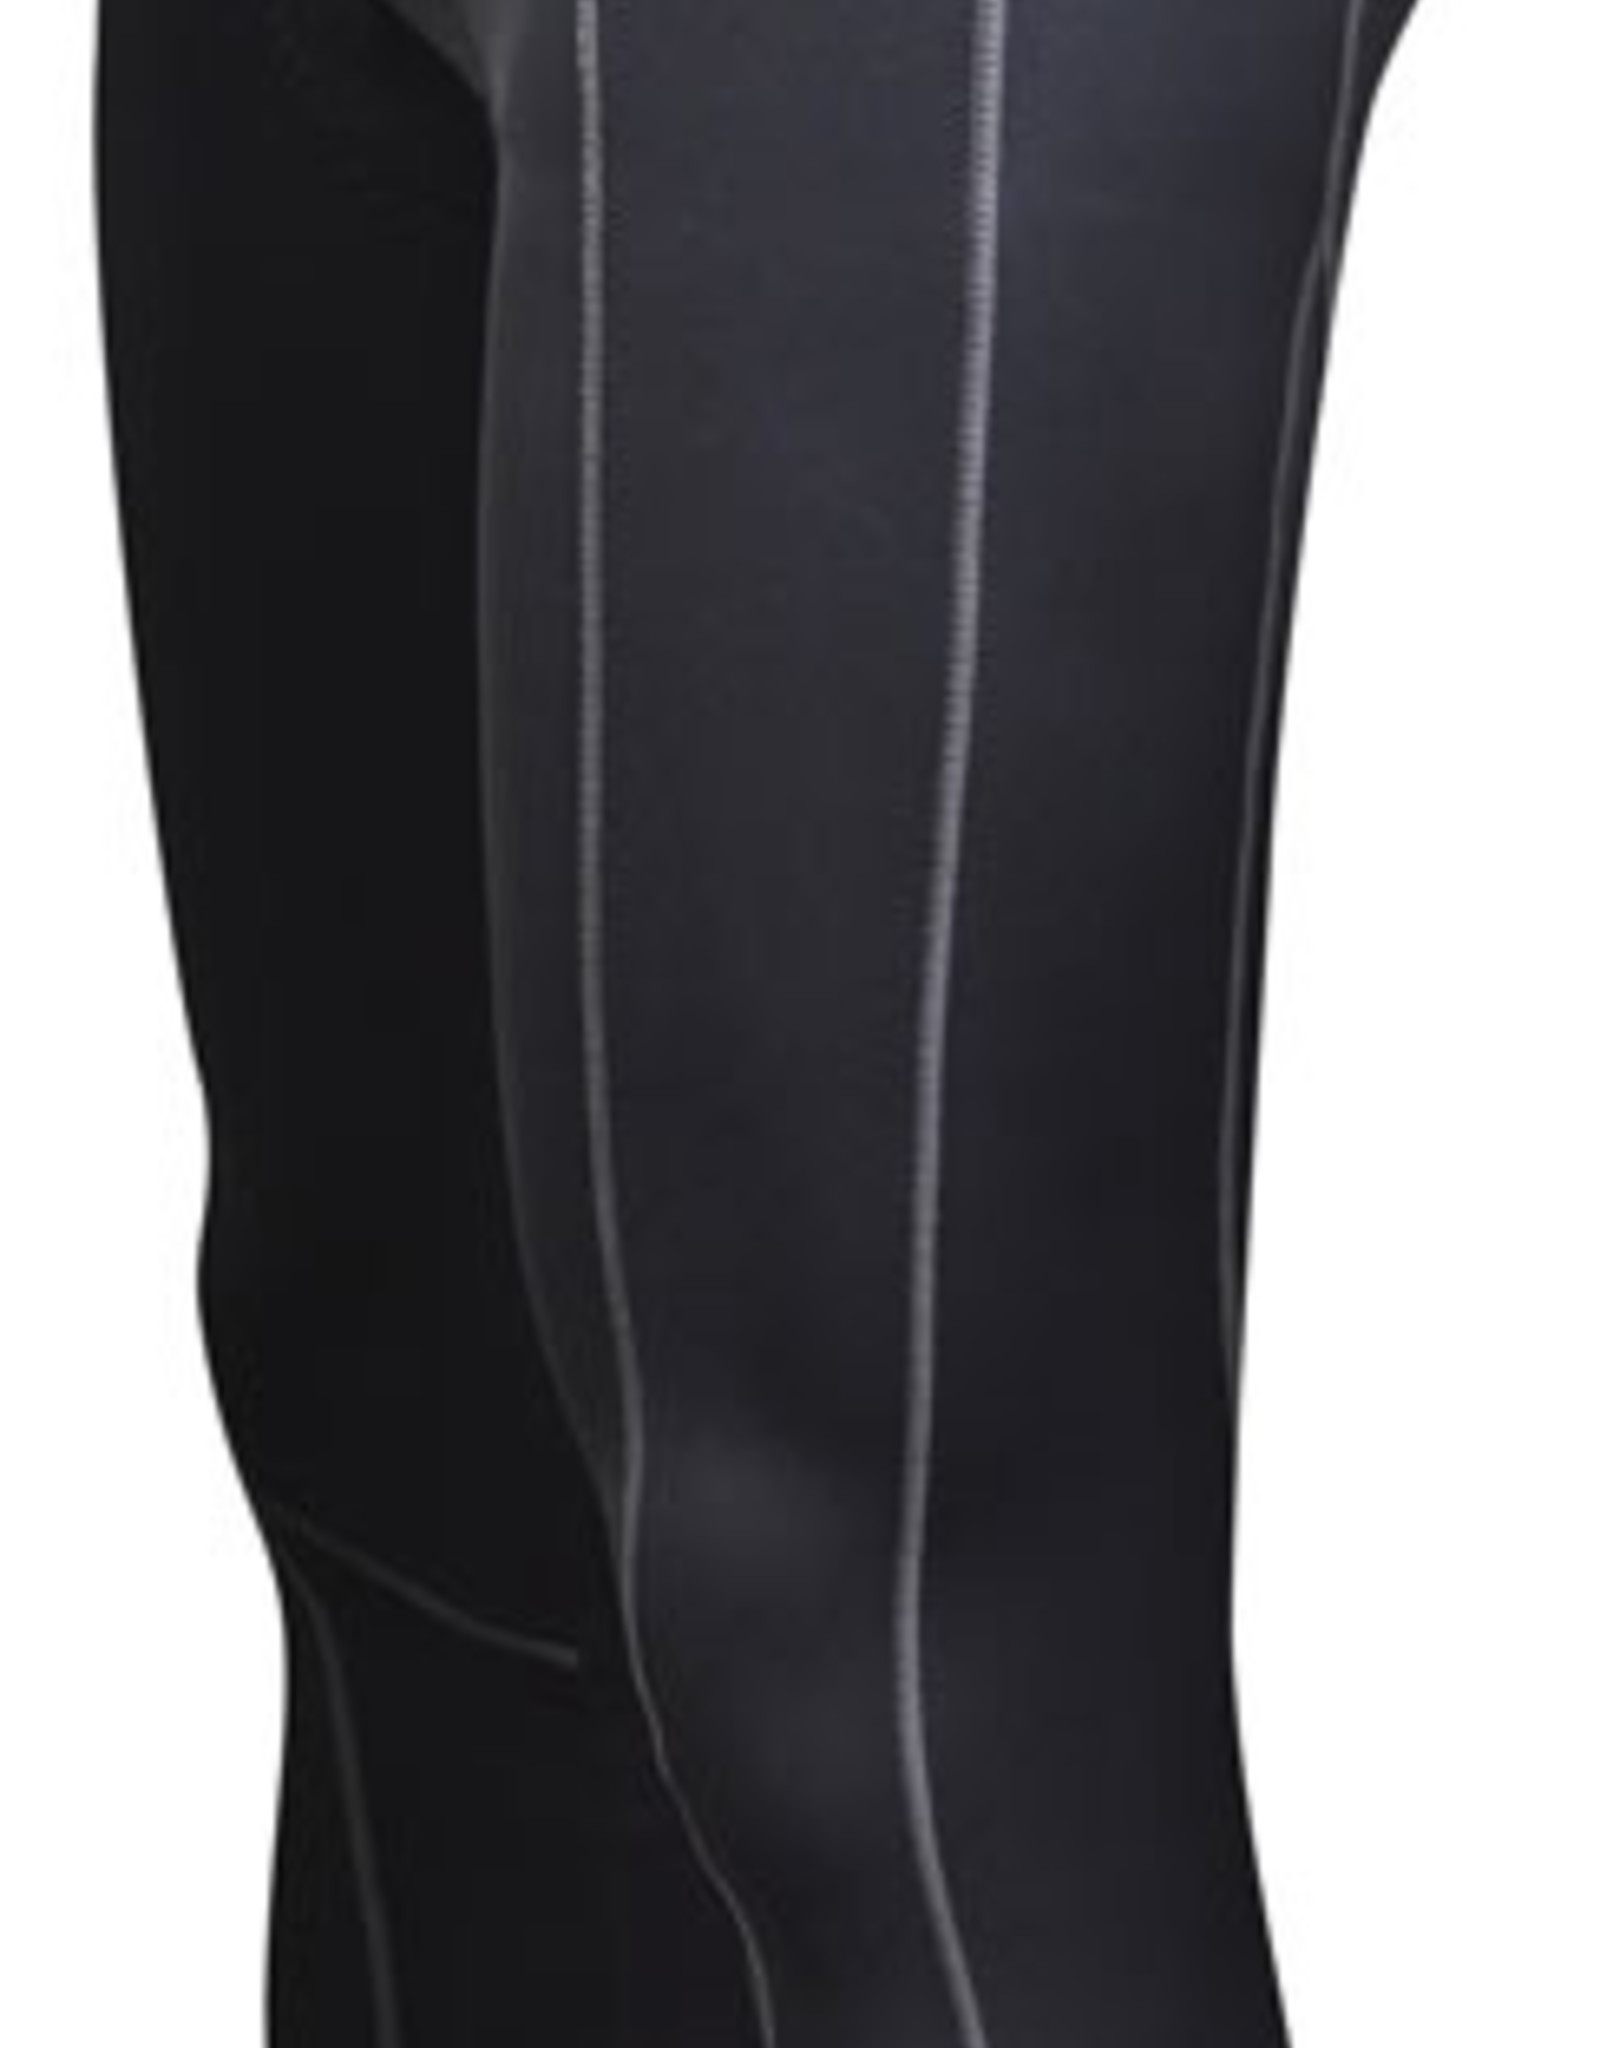 Funkier Polar Active Thermal Microfleece Full Length Tights in Black (S-302-W-B14)